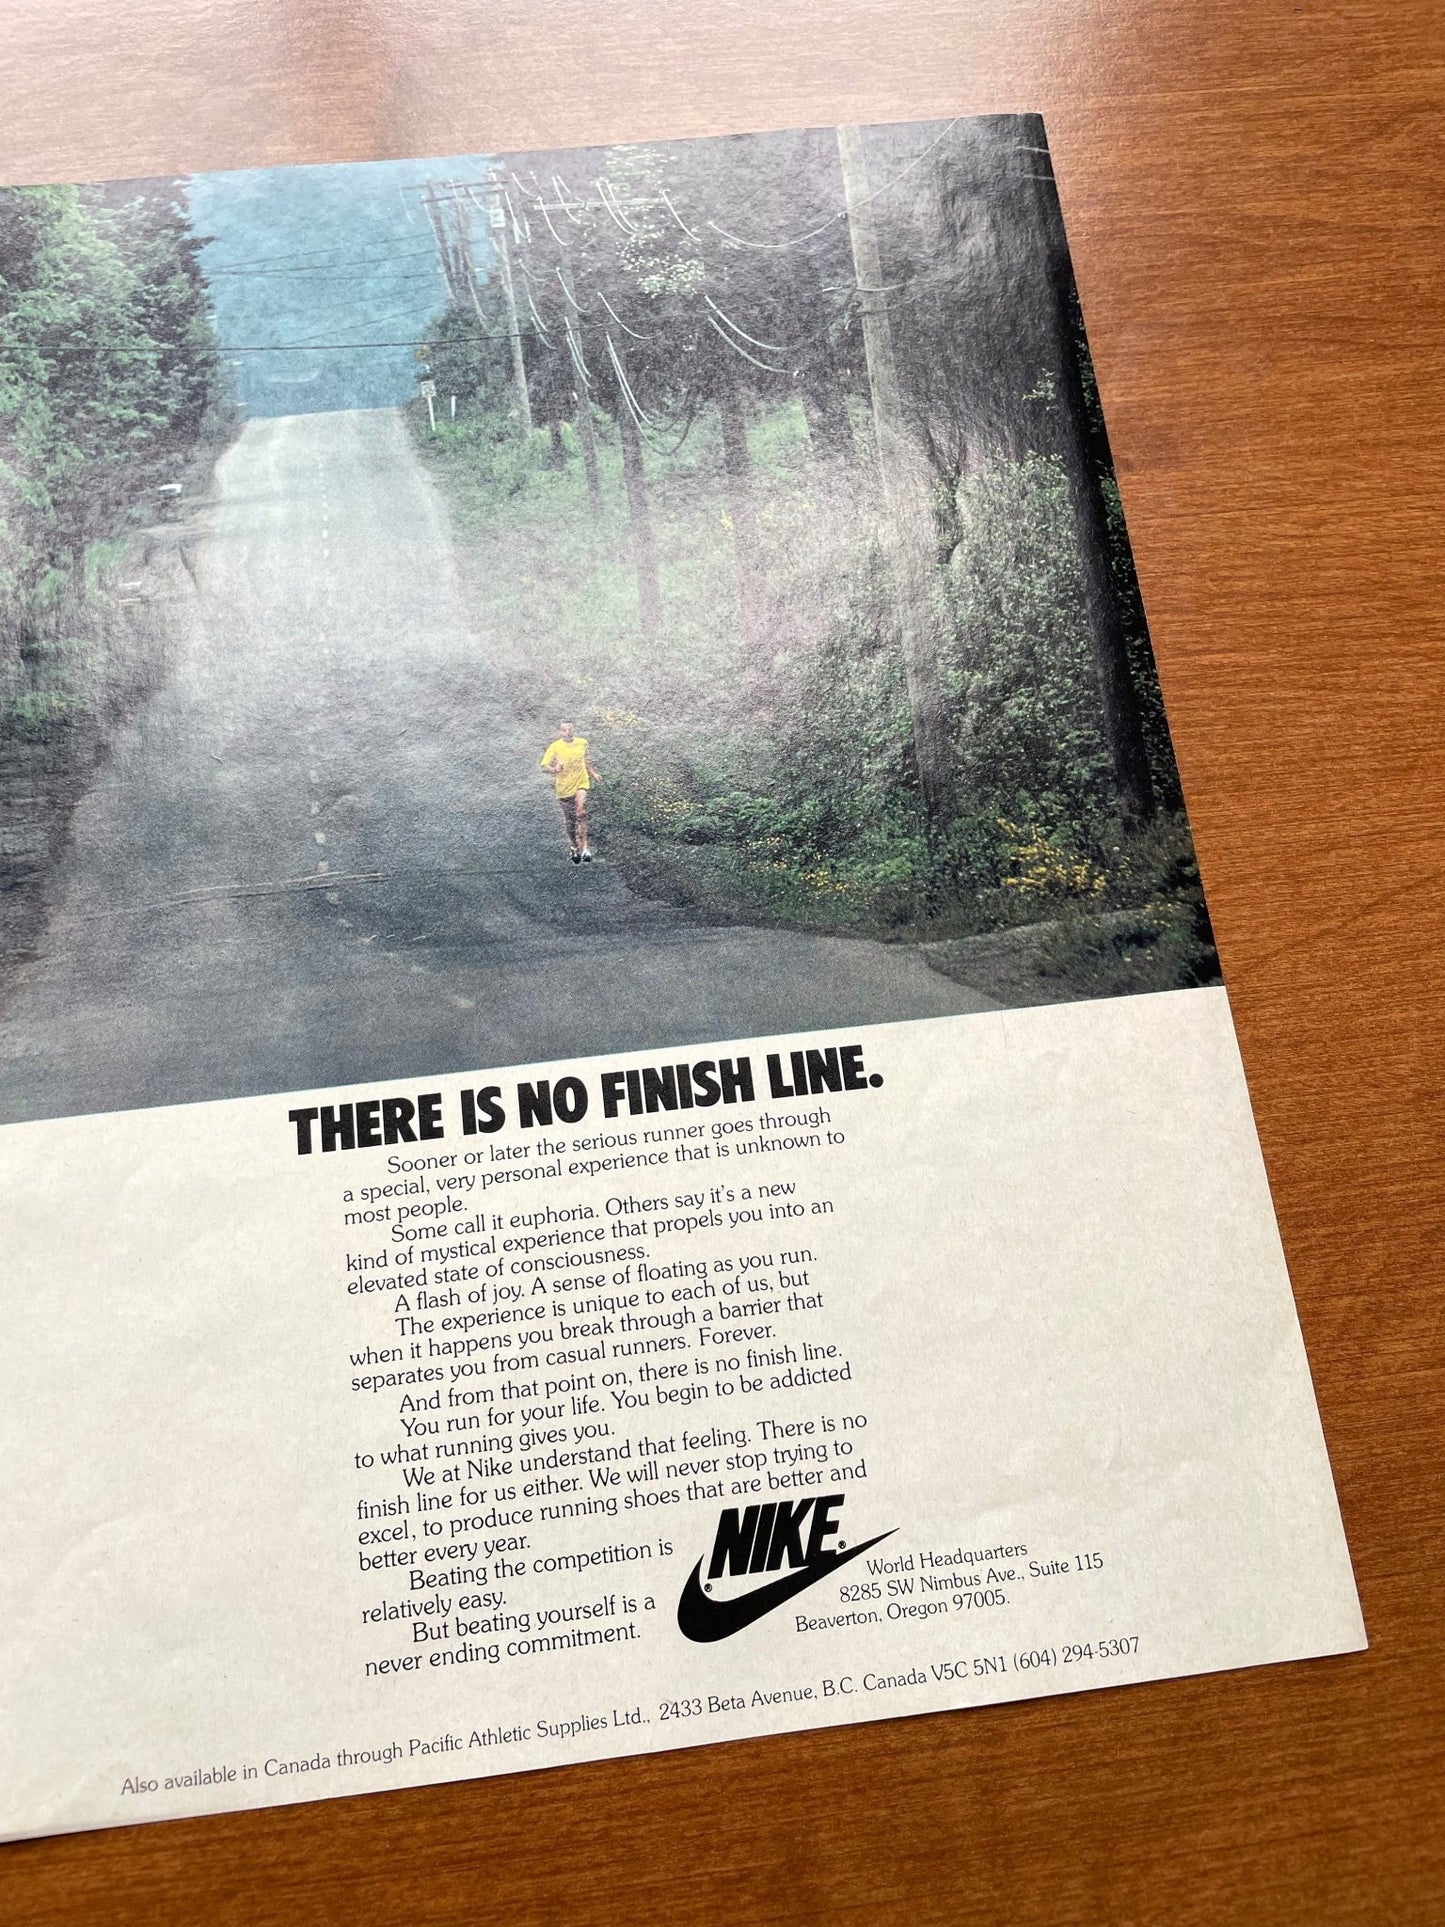 1977 Nike "There Is No Finish Line." Advertisement